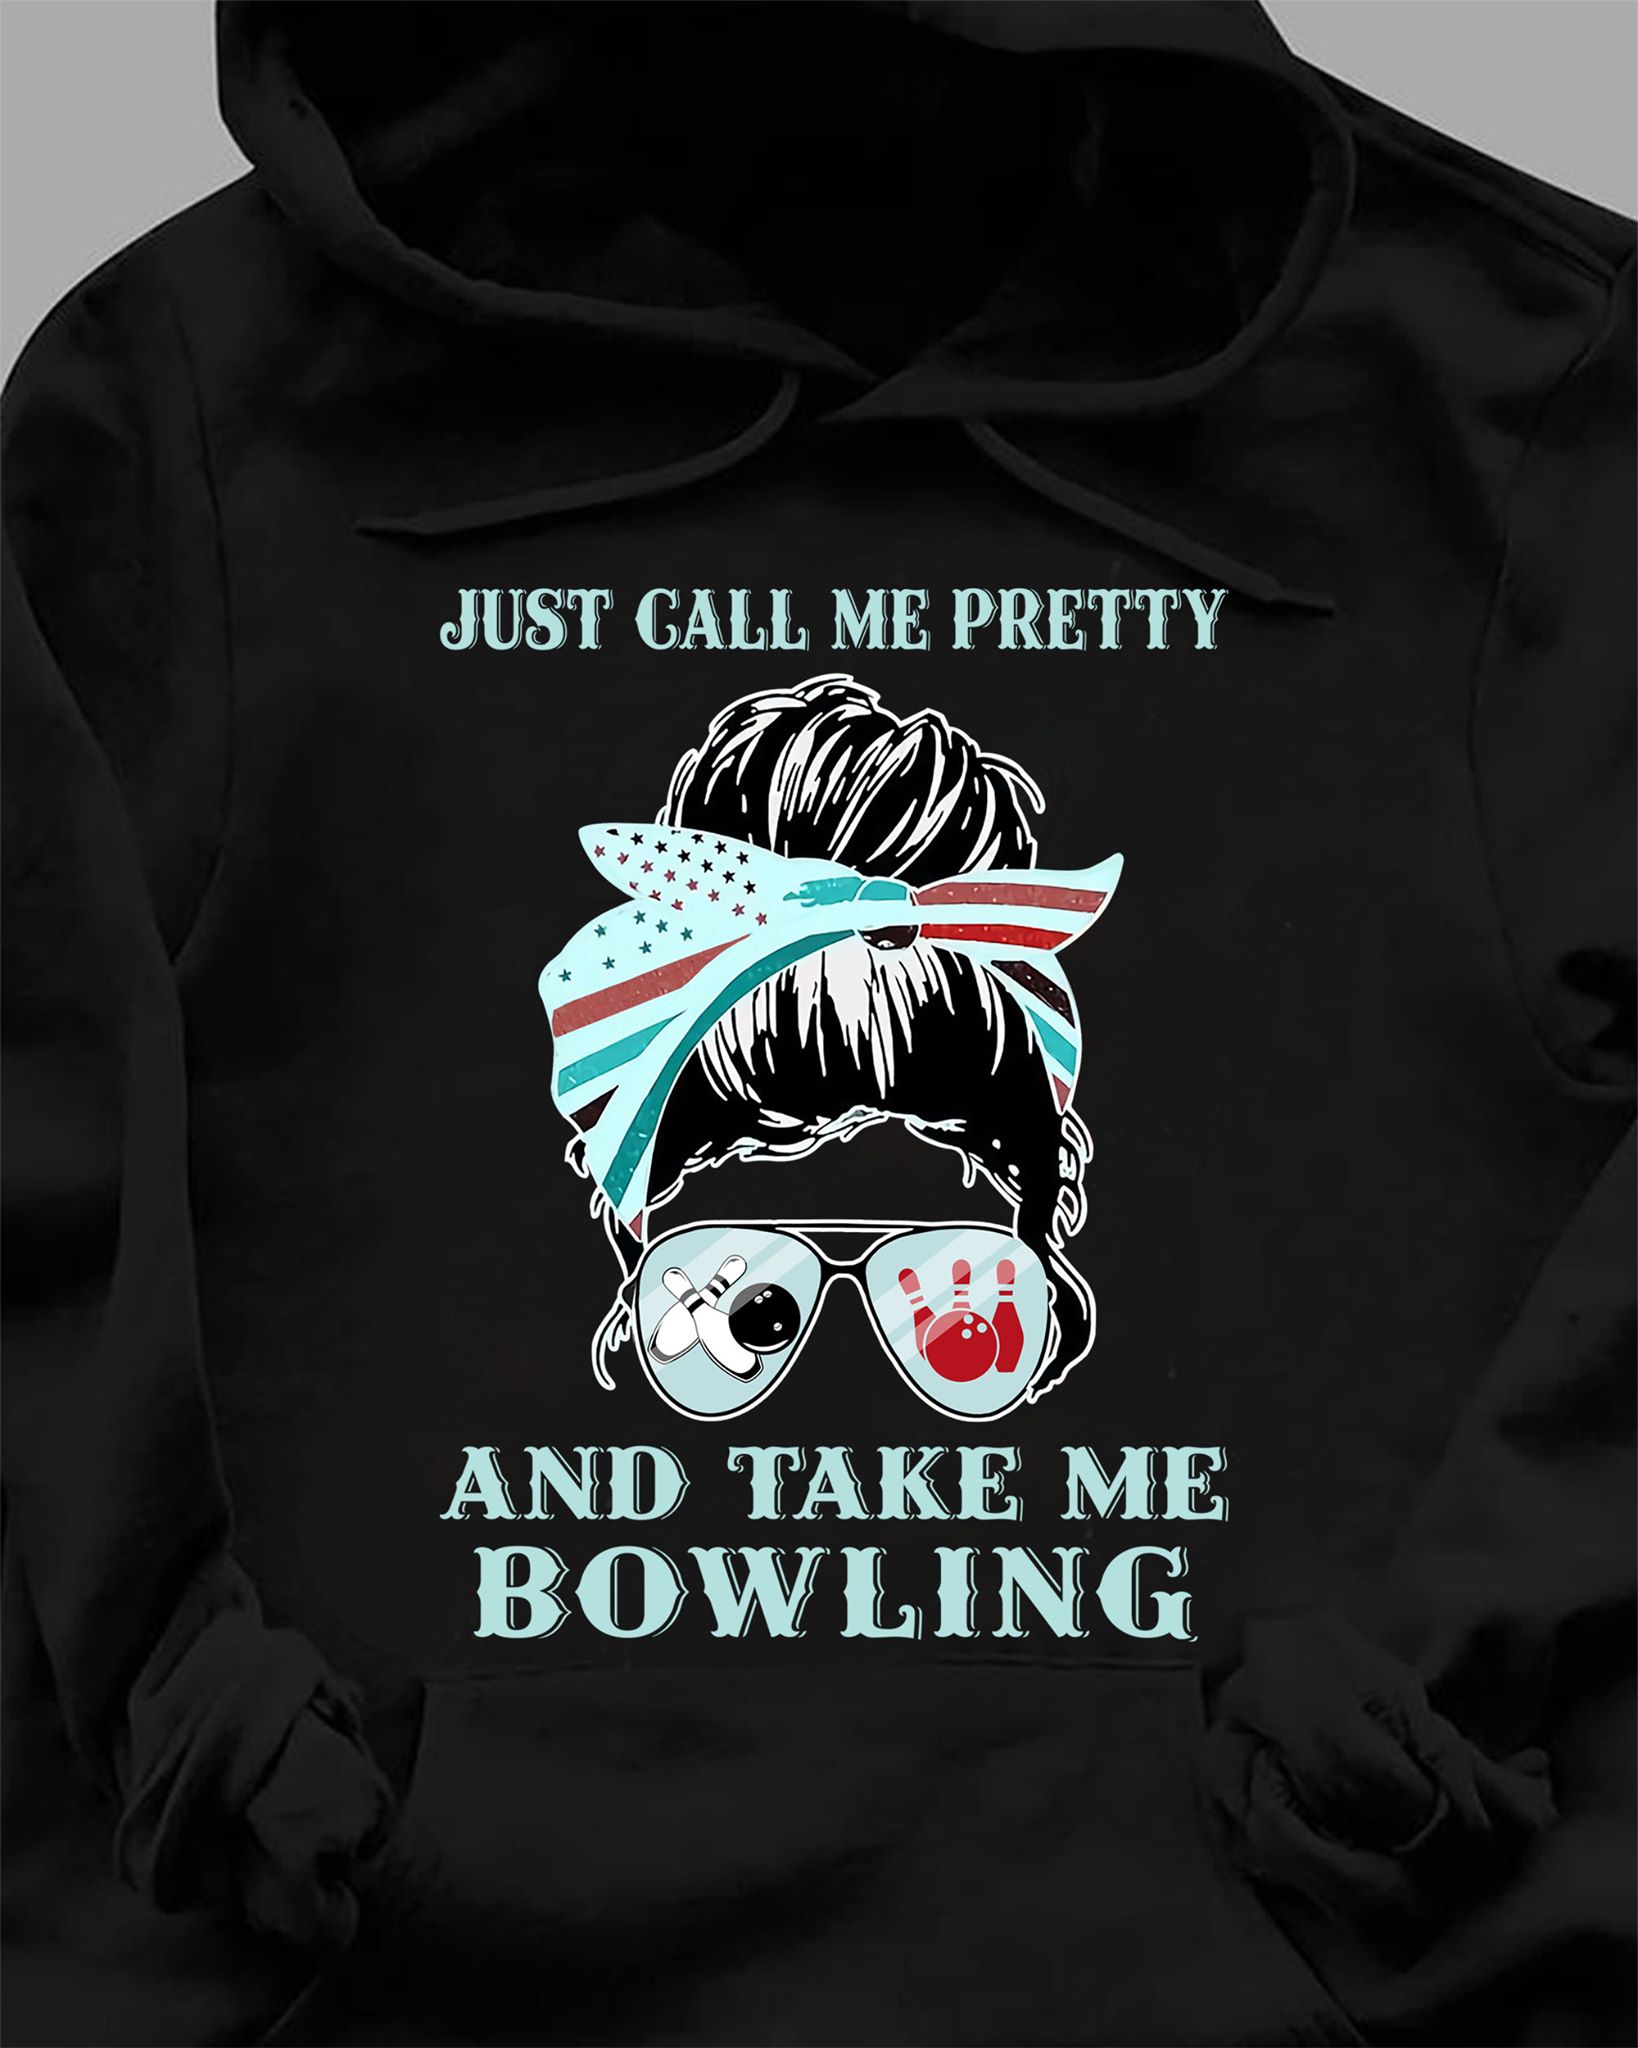 Just call me pretty and take me bowling - Bowling lover, woman face